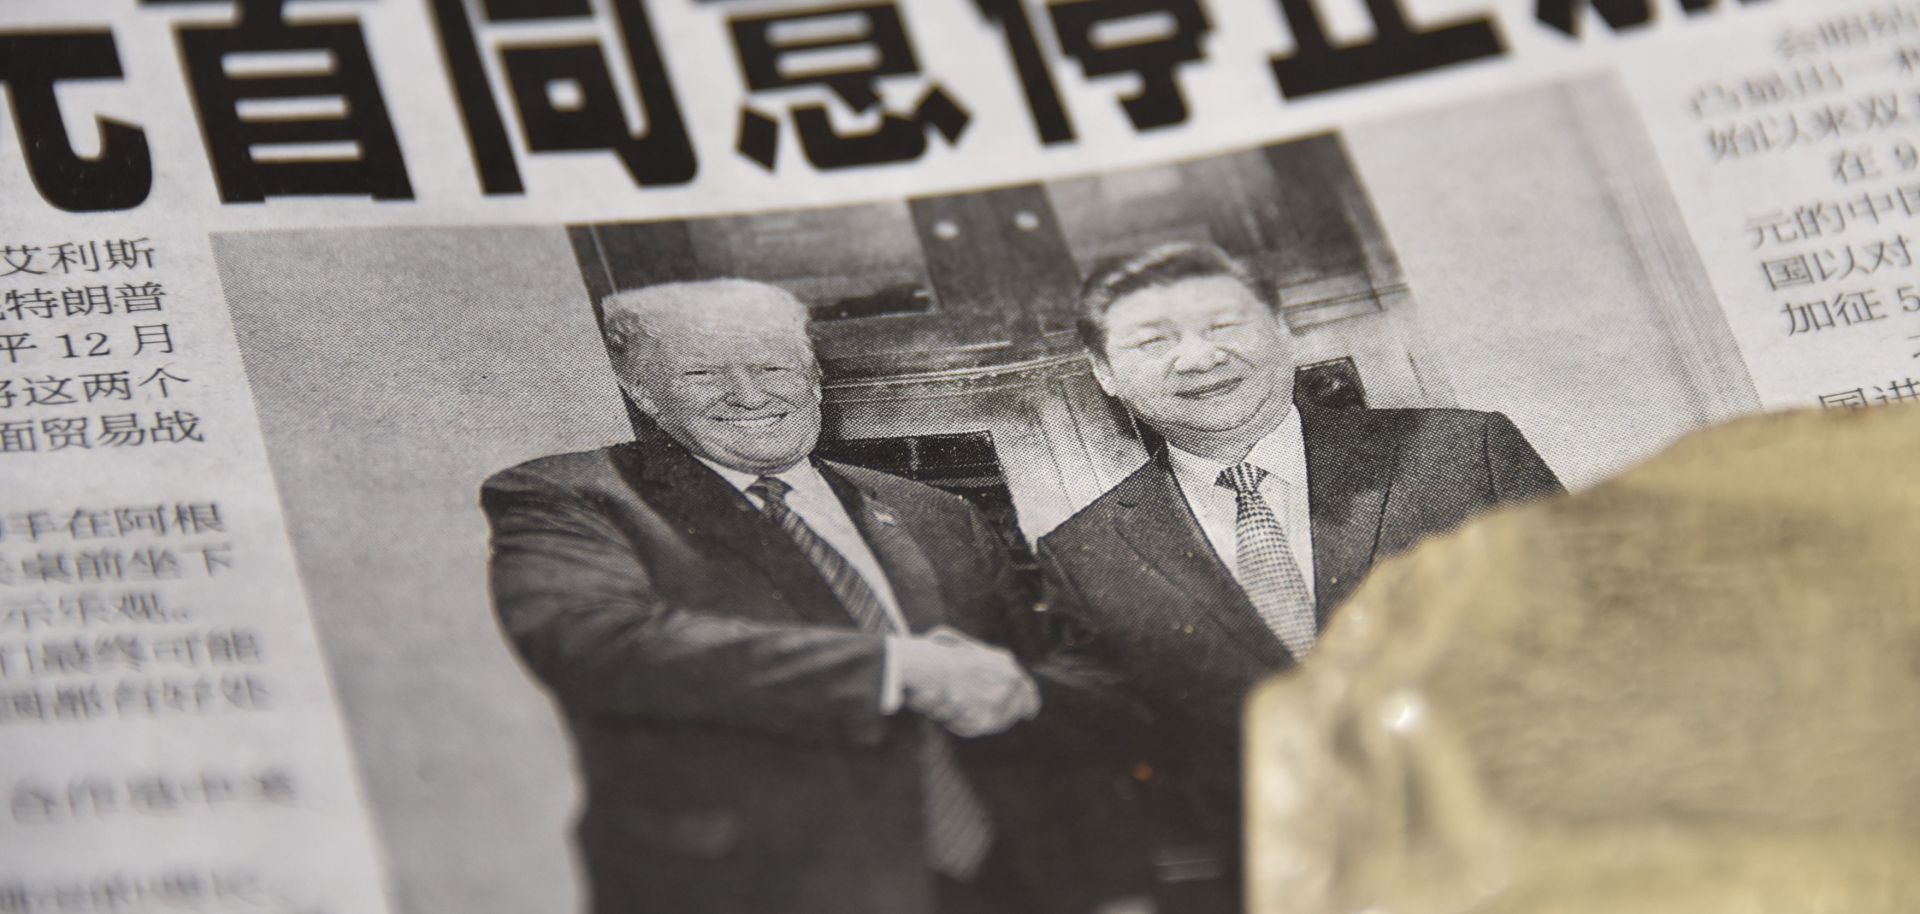 A Chinese newspaper on display at a newsstand in Beijing on Dec. 3, 2018, features a front-page story about the Group of 20 meeting between Chinese President Xi Jinping and U.S President Donald Trump in which the two leaders agreed to a trade truce.